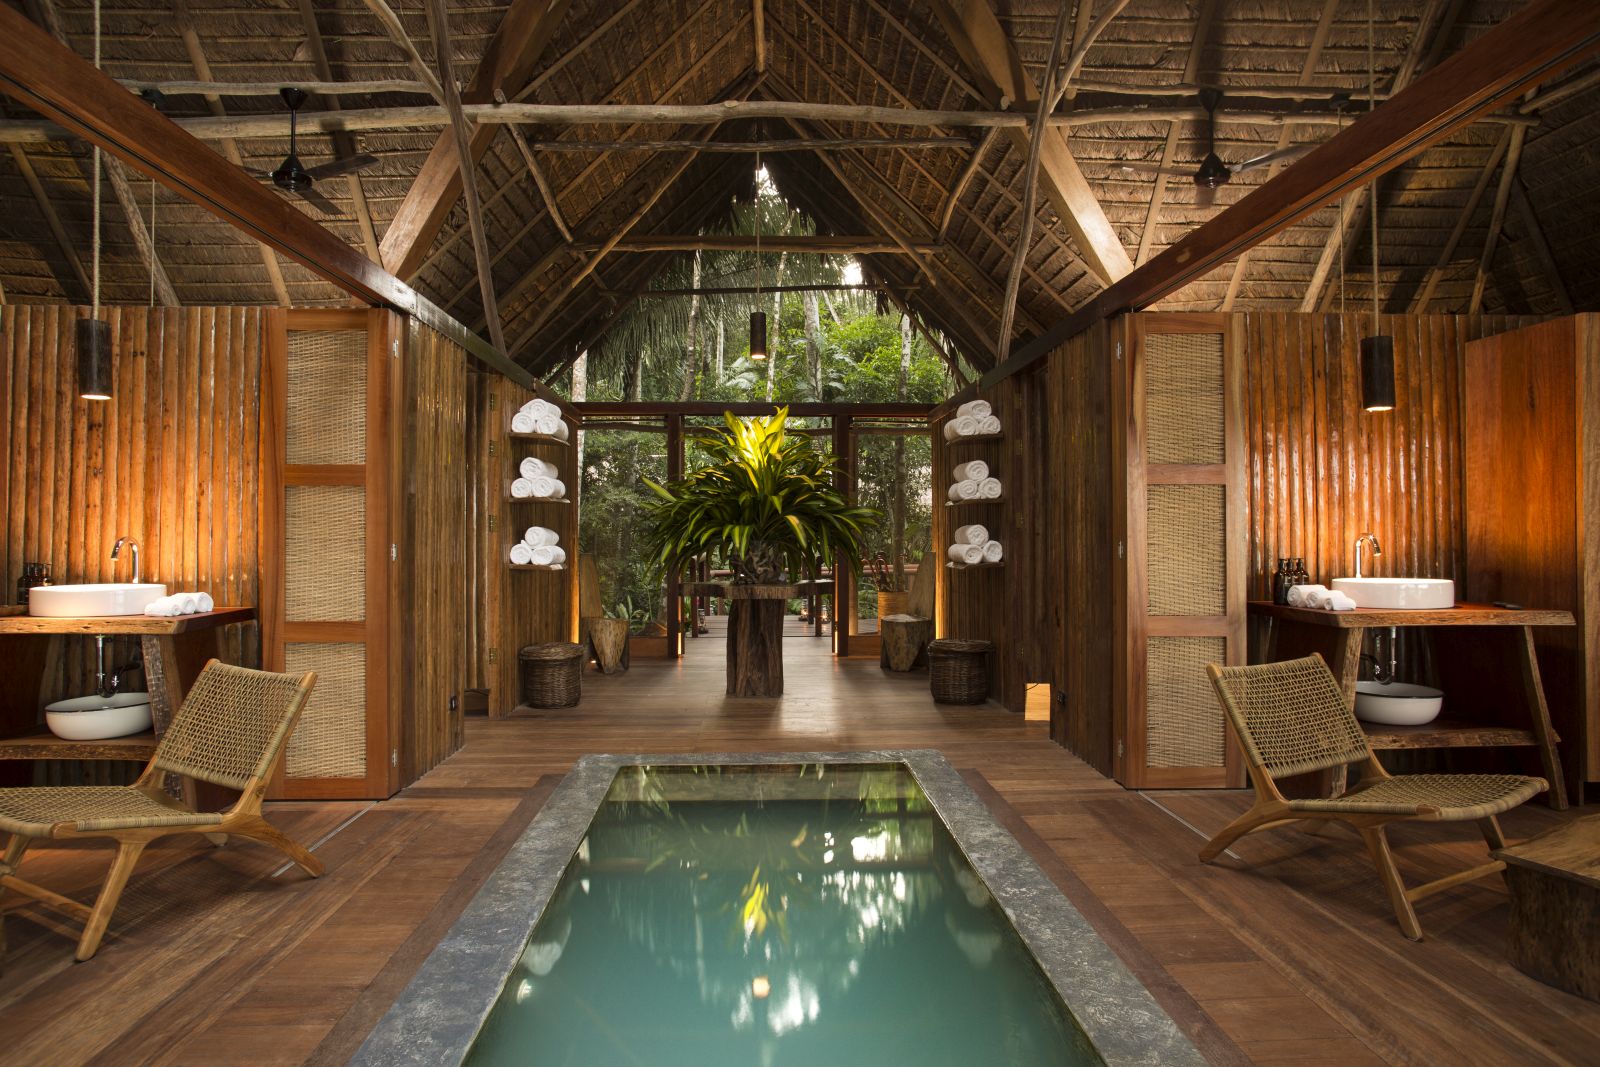 Plunge pool in the spa of the Inkaterra Reserva Amazonica Lodge in Peru